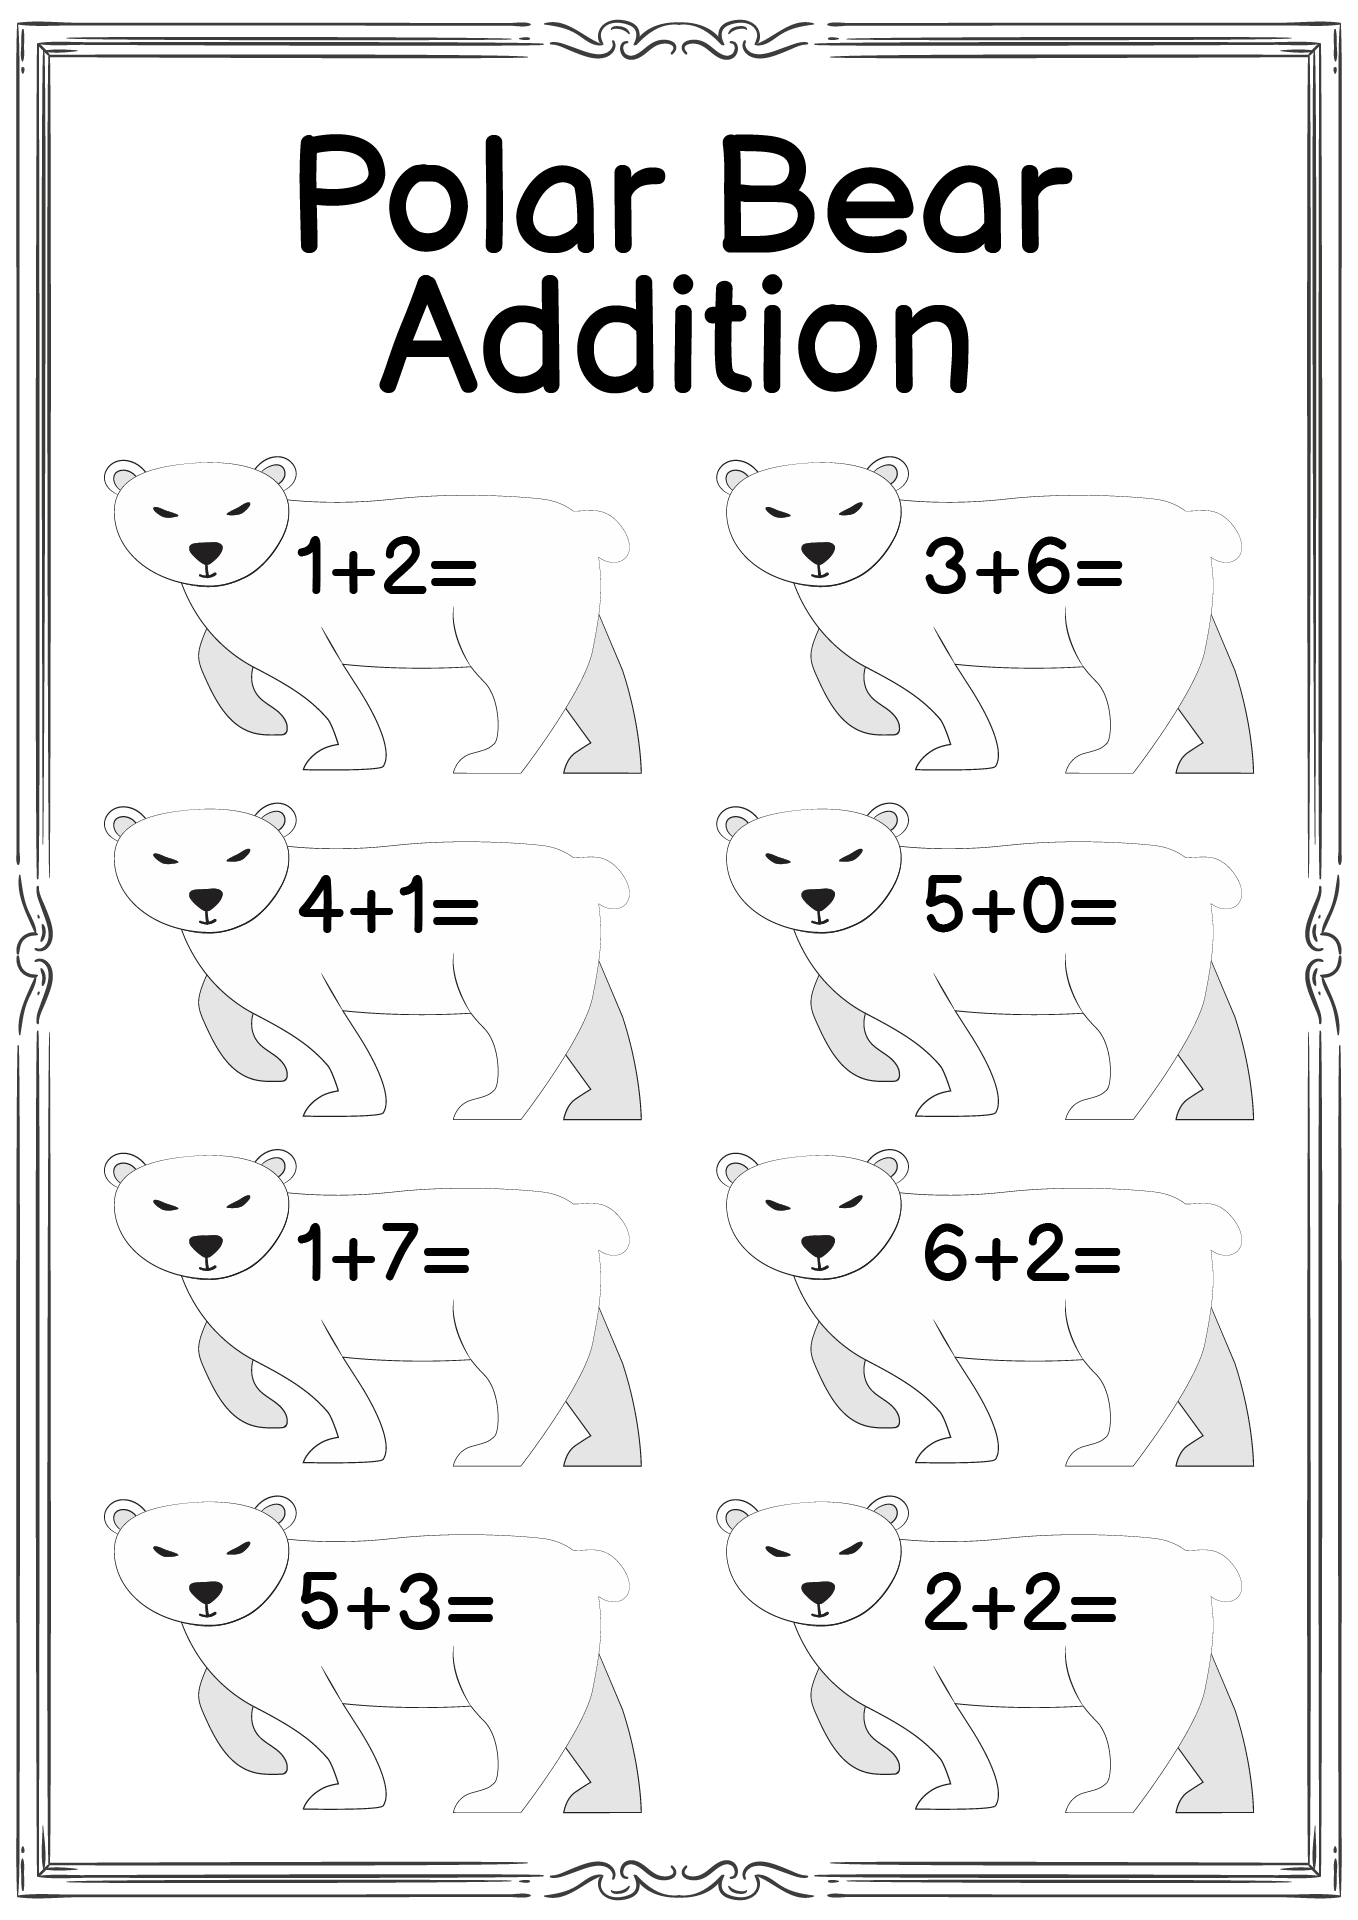 11 Best Images of Arctic Animals Activities And Worksheets Arctic